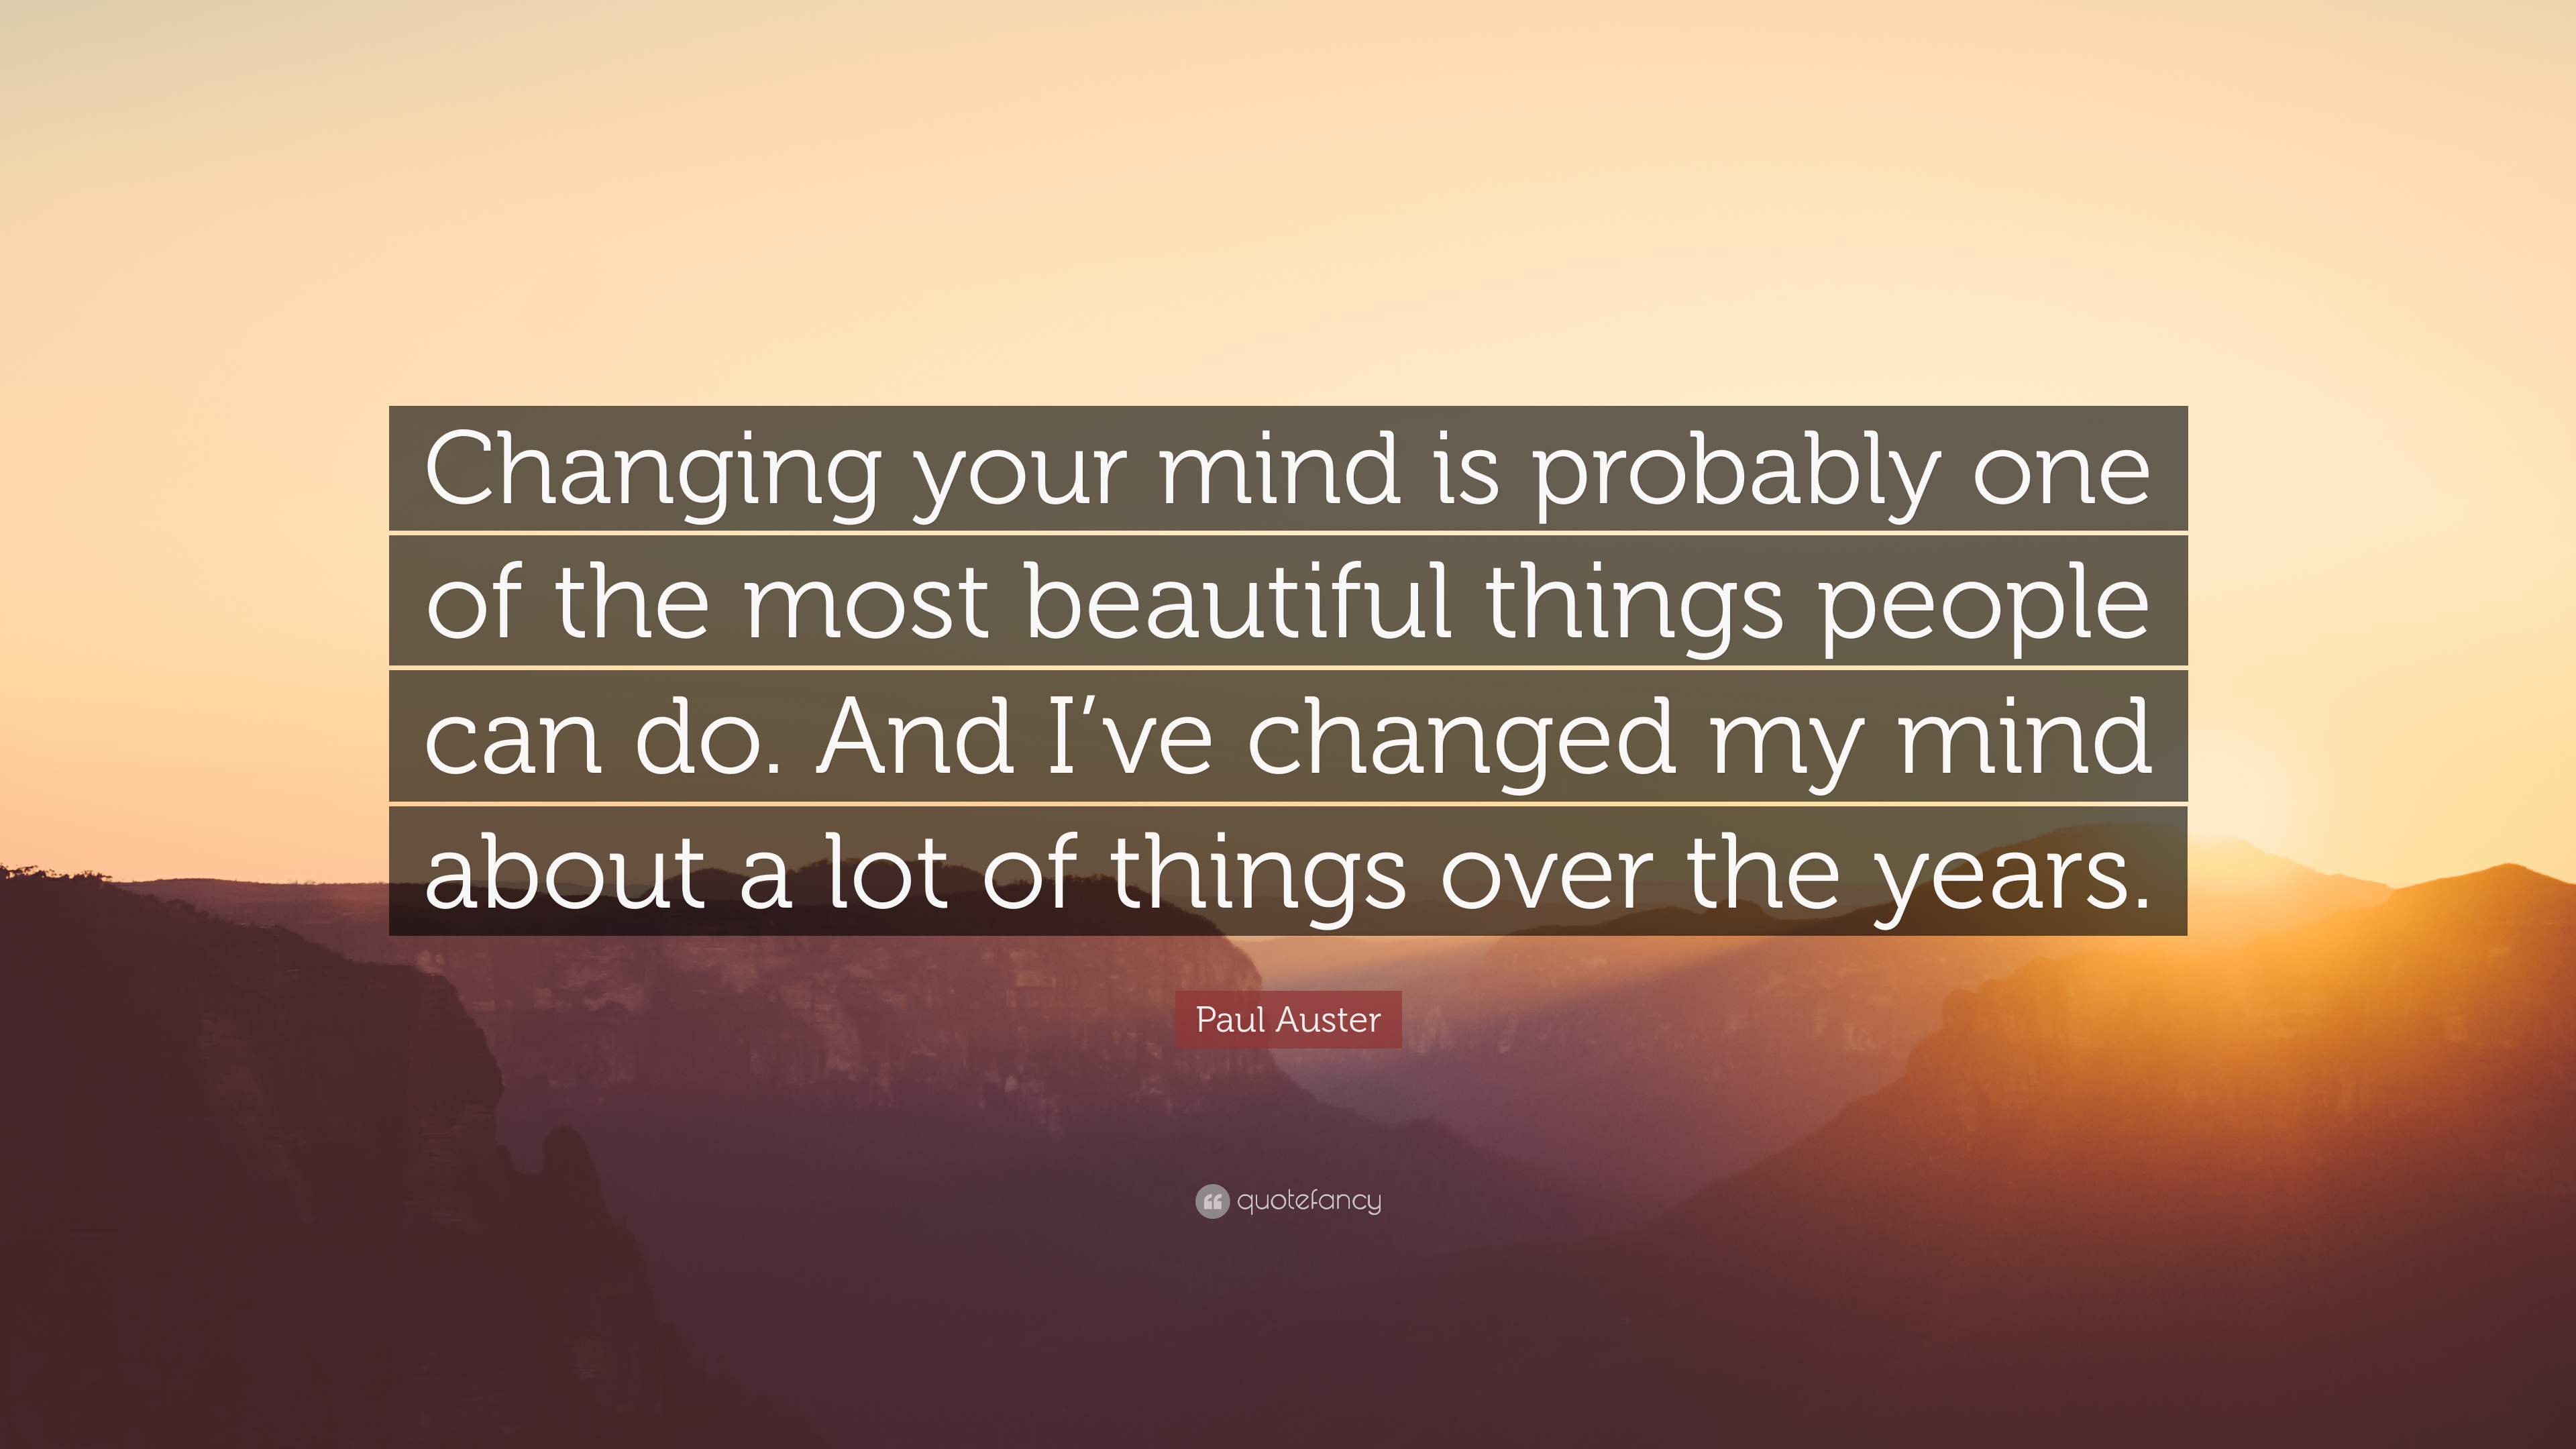 changing your mind is probably one of the most beautiful things people can do. and i’ve changed my mind about a lot of things over the years. paul auster